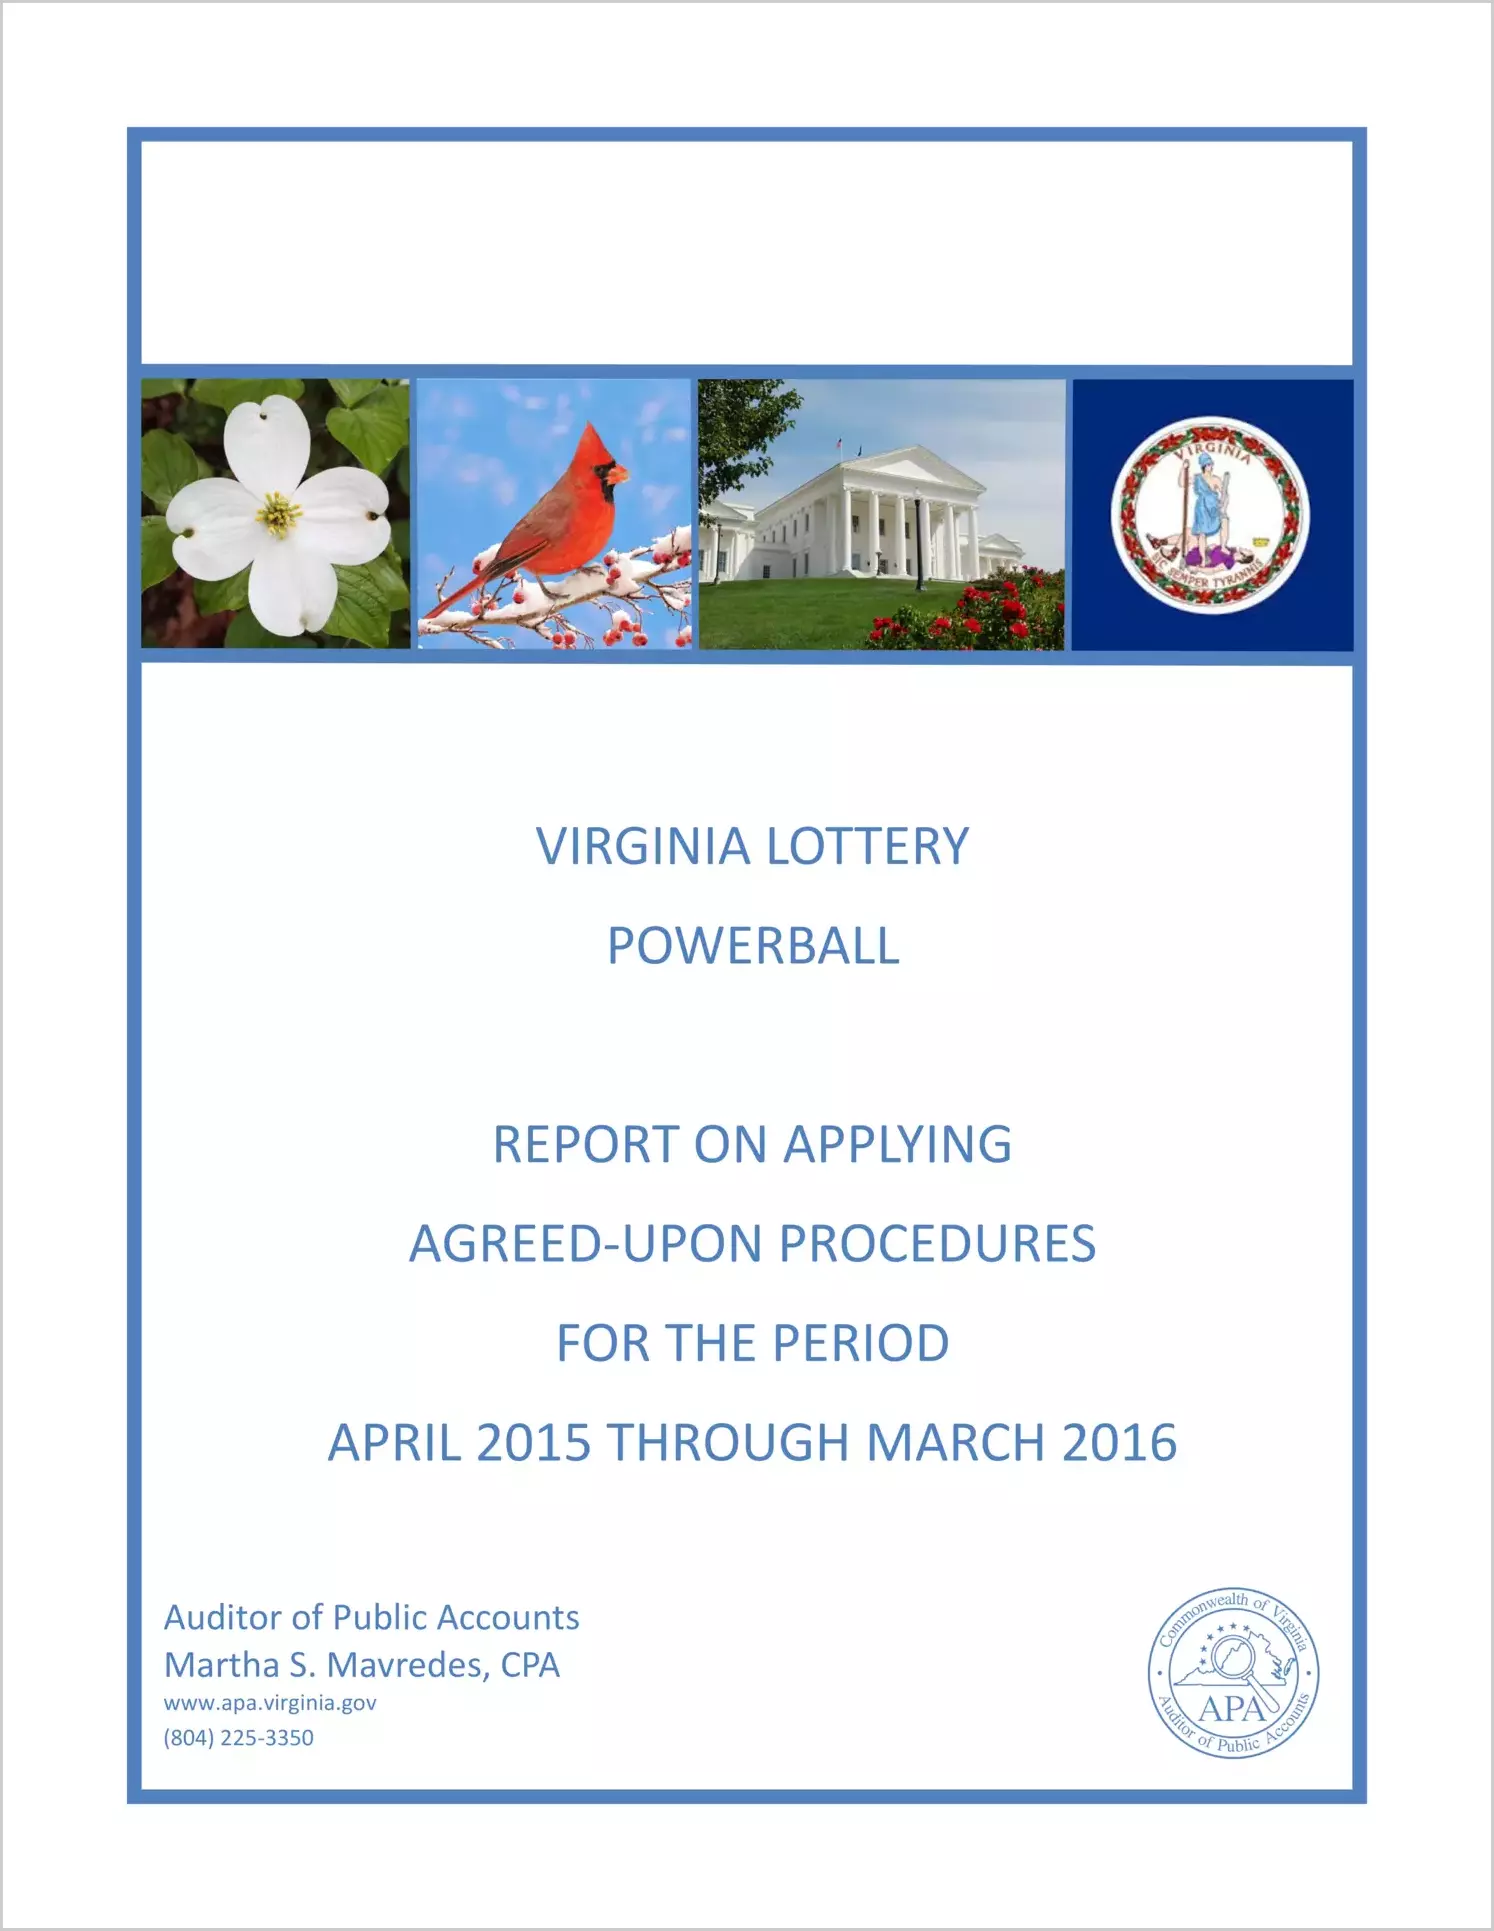 VA Lottery Powerball report on Applying Agreed-Upon Procedures for the period April, 2015 through March, 2016